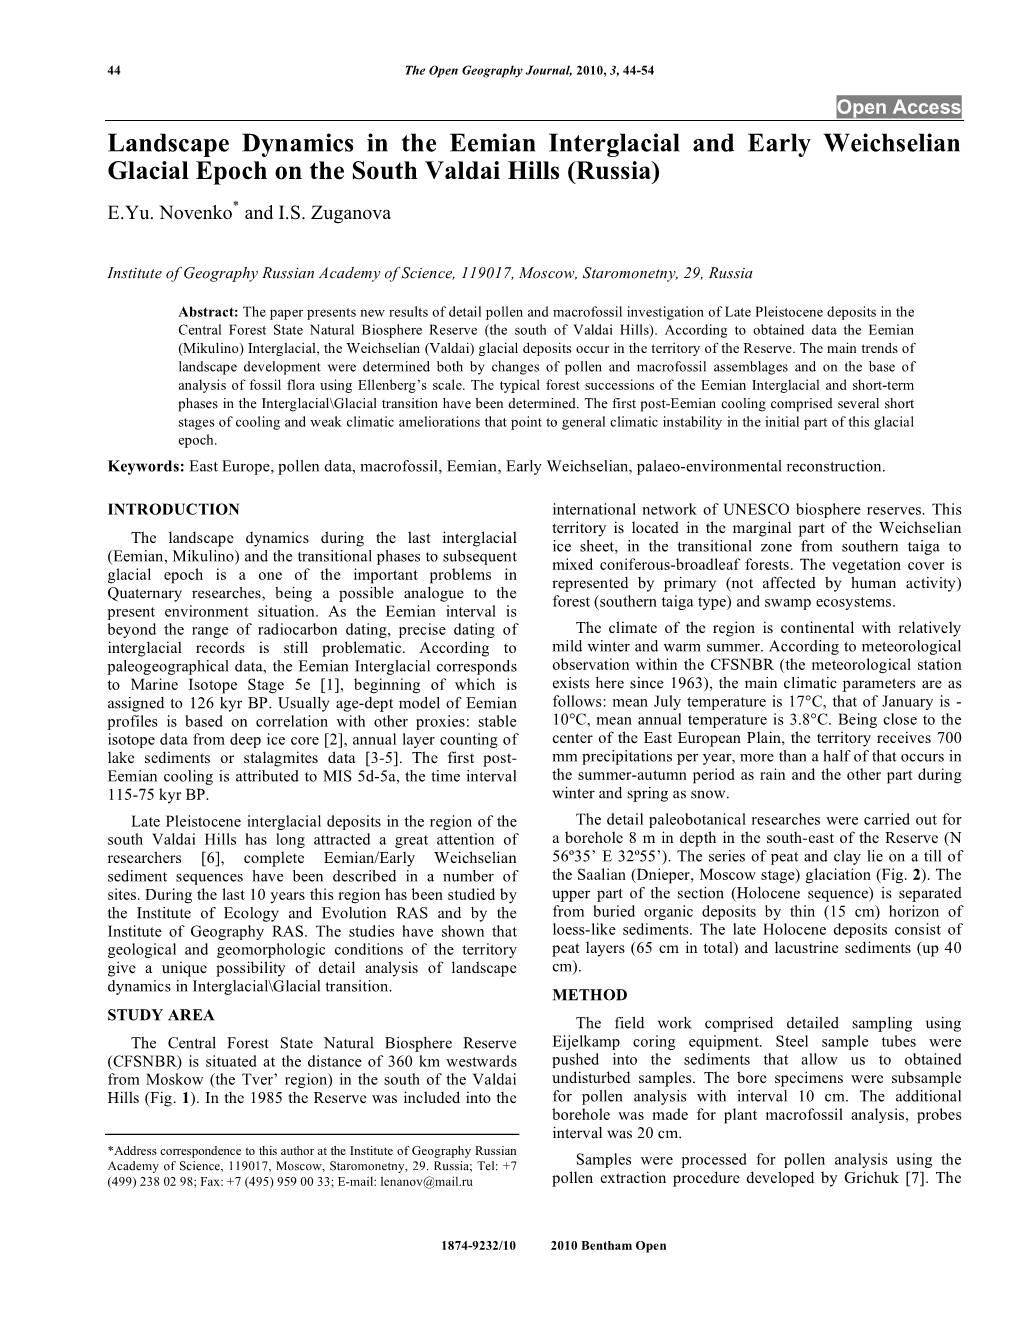 Landscape Dynamics in the Eemian Interglacial and Early Weichselian Glacial Epoch on the South Valdai Hills (Russia) E.Yu